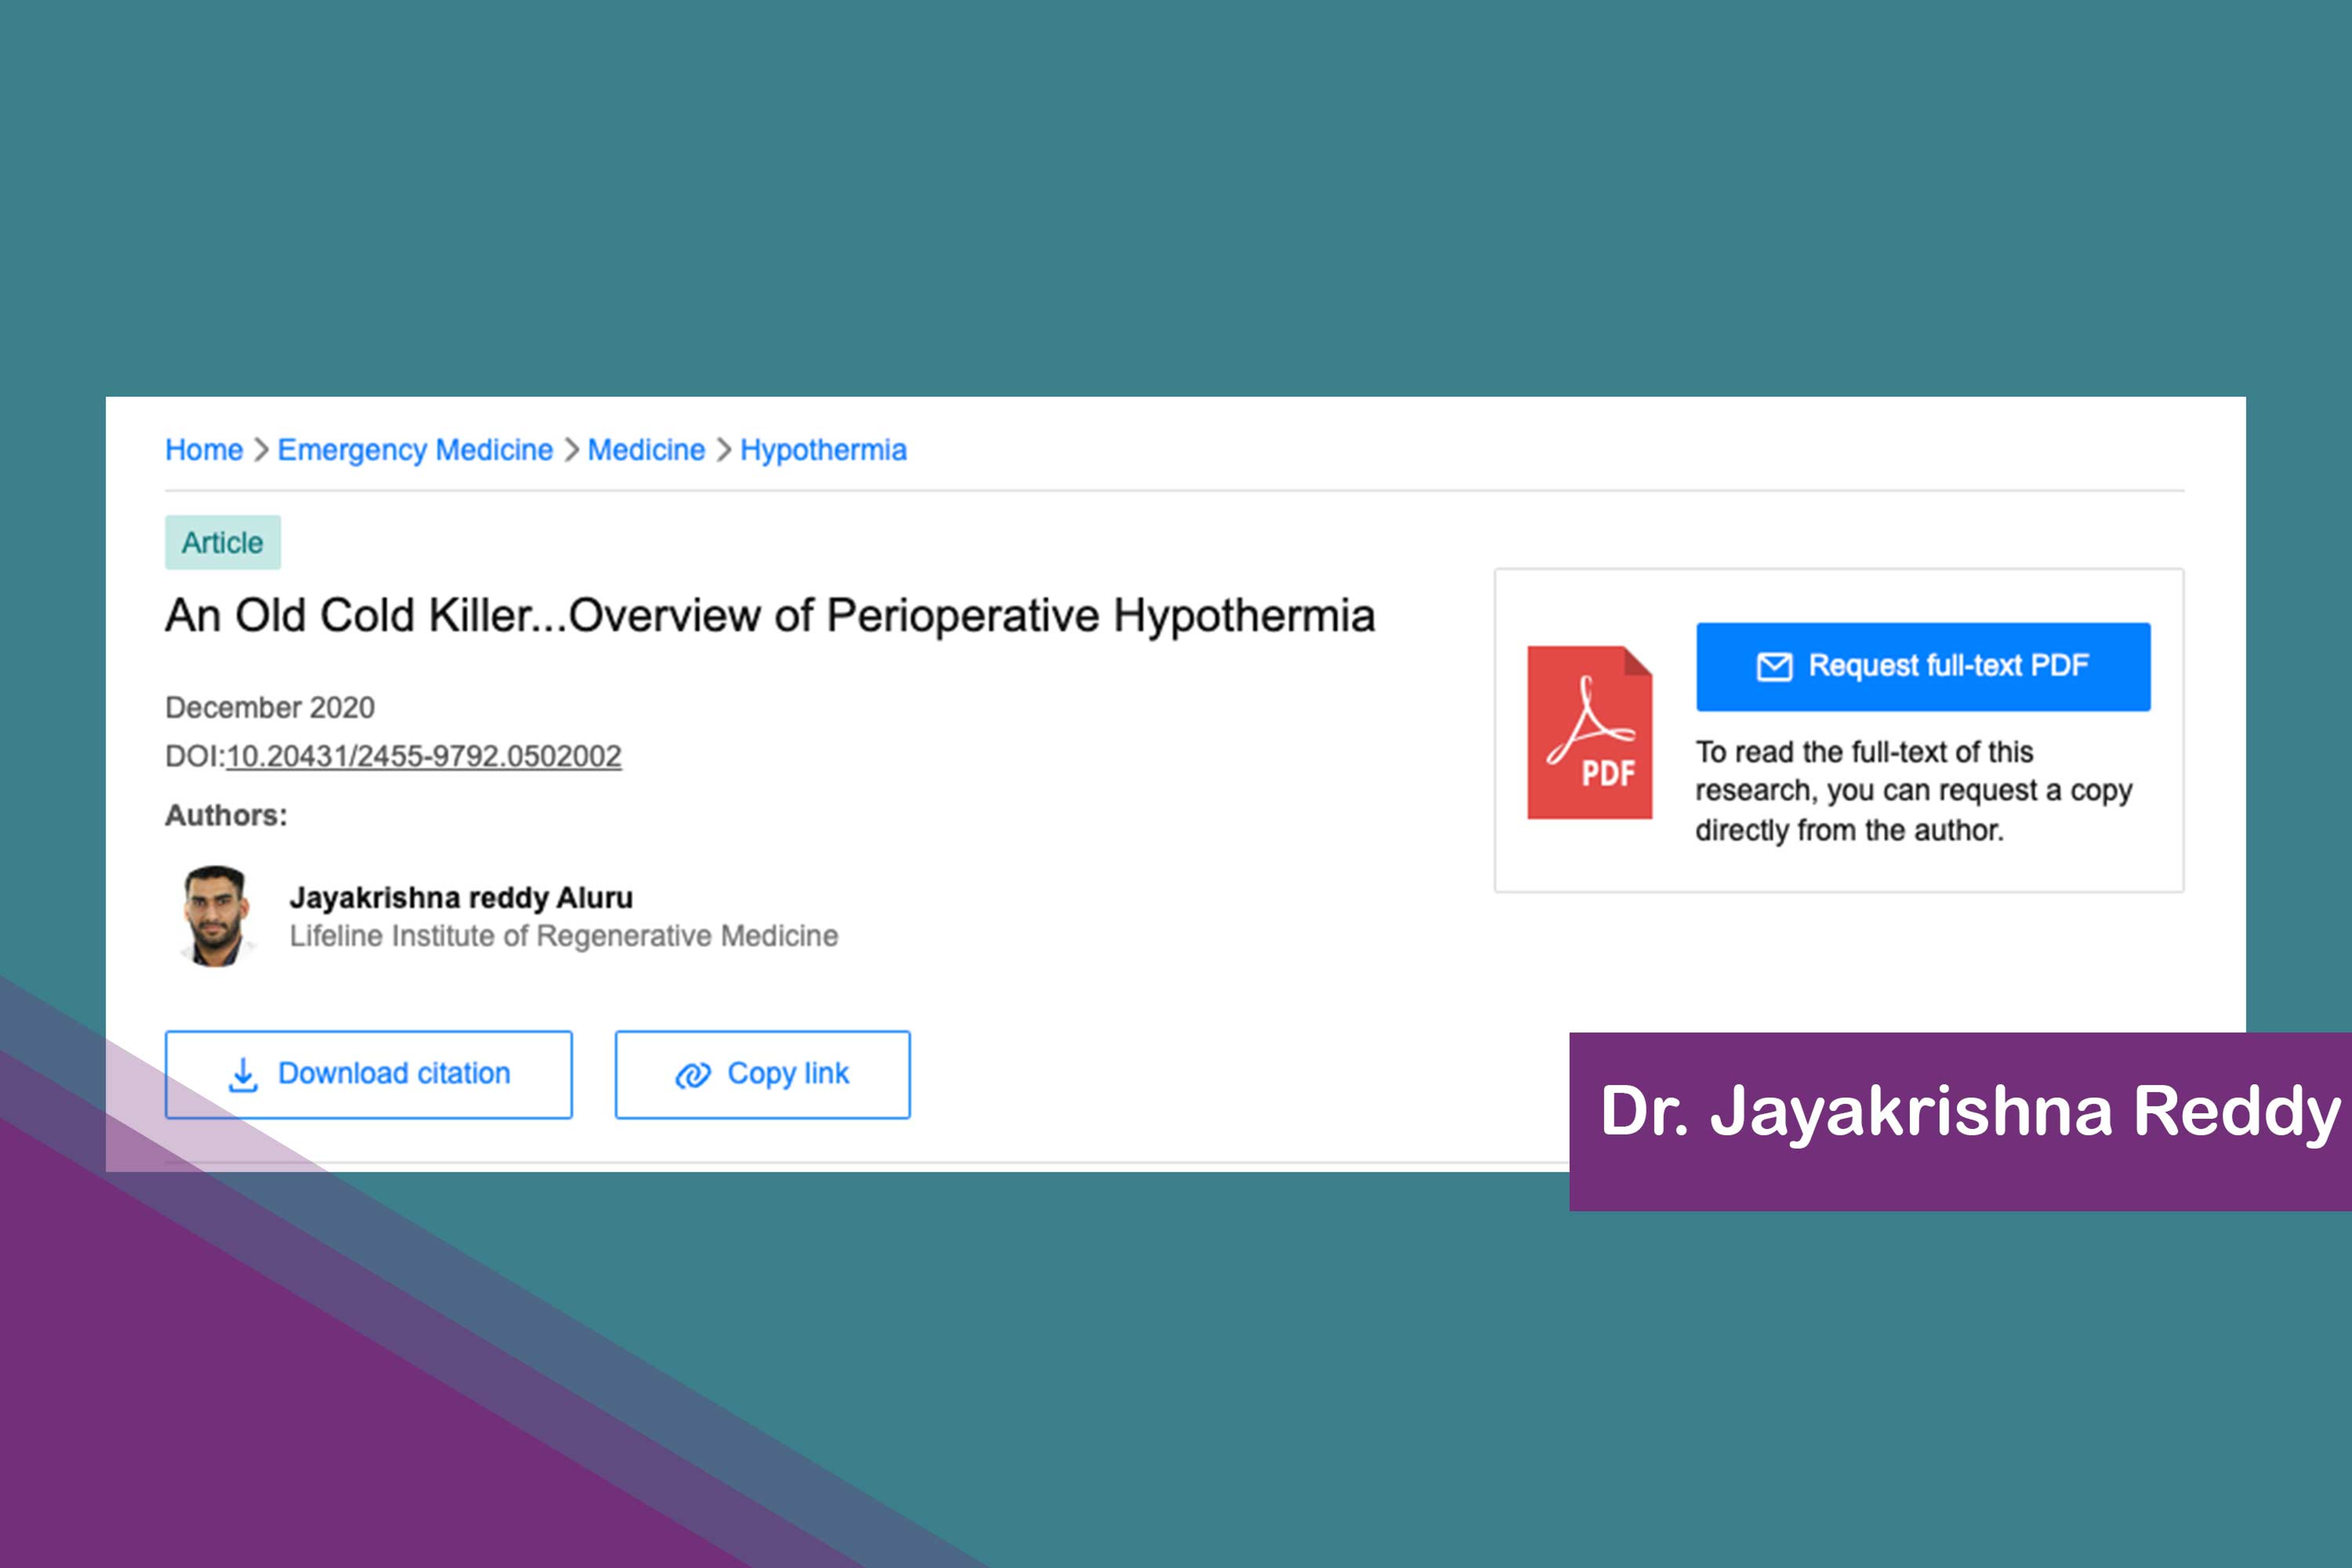 An Old Cold Killer...Overview of Perioperative Hypothermia